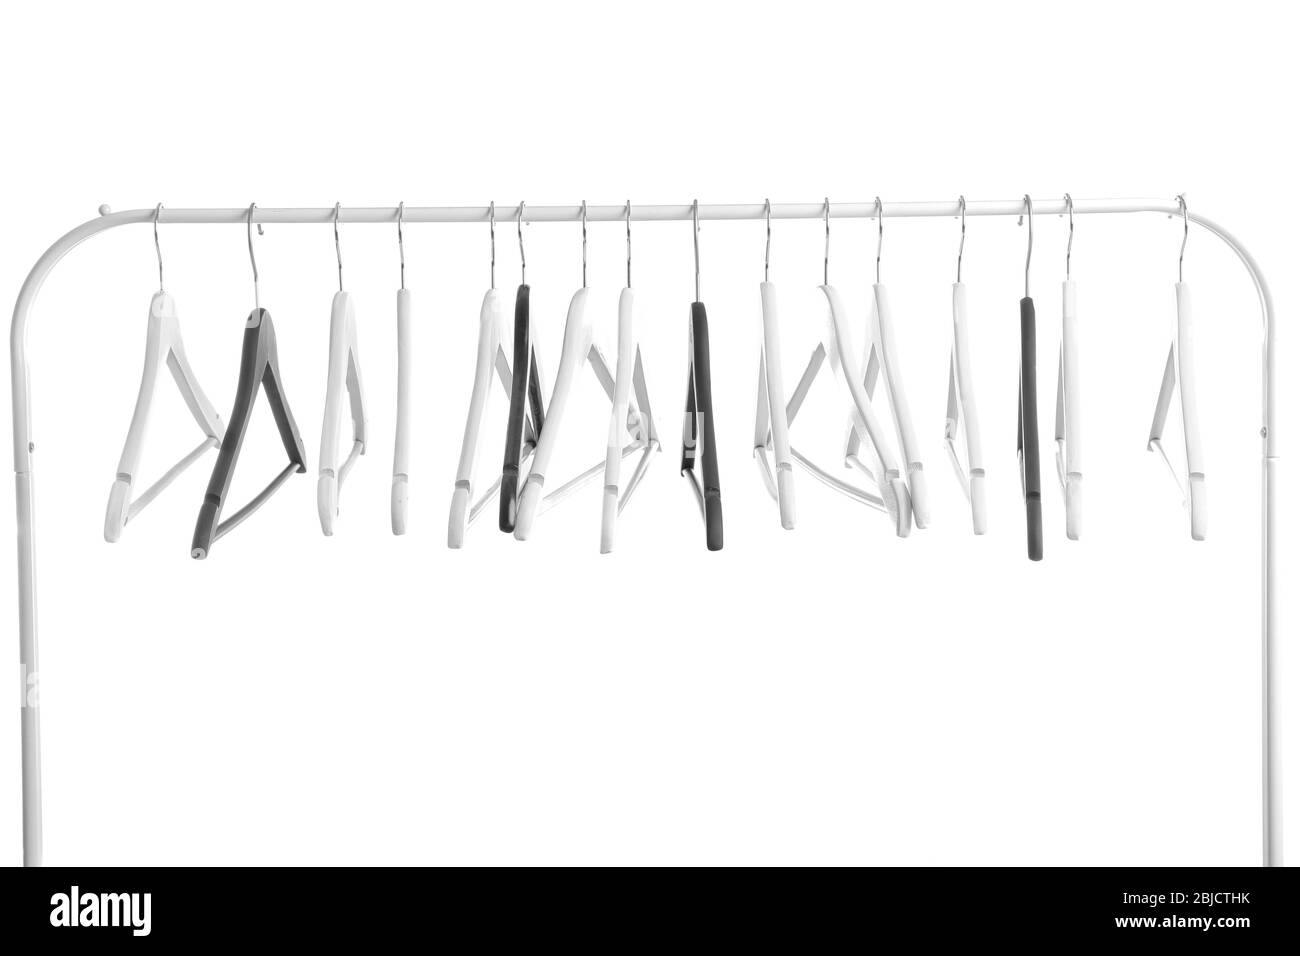 Modern hangers on white wall background Stock Photo